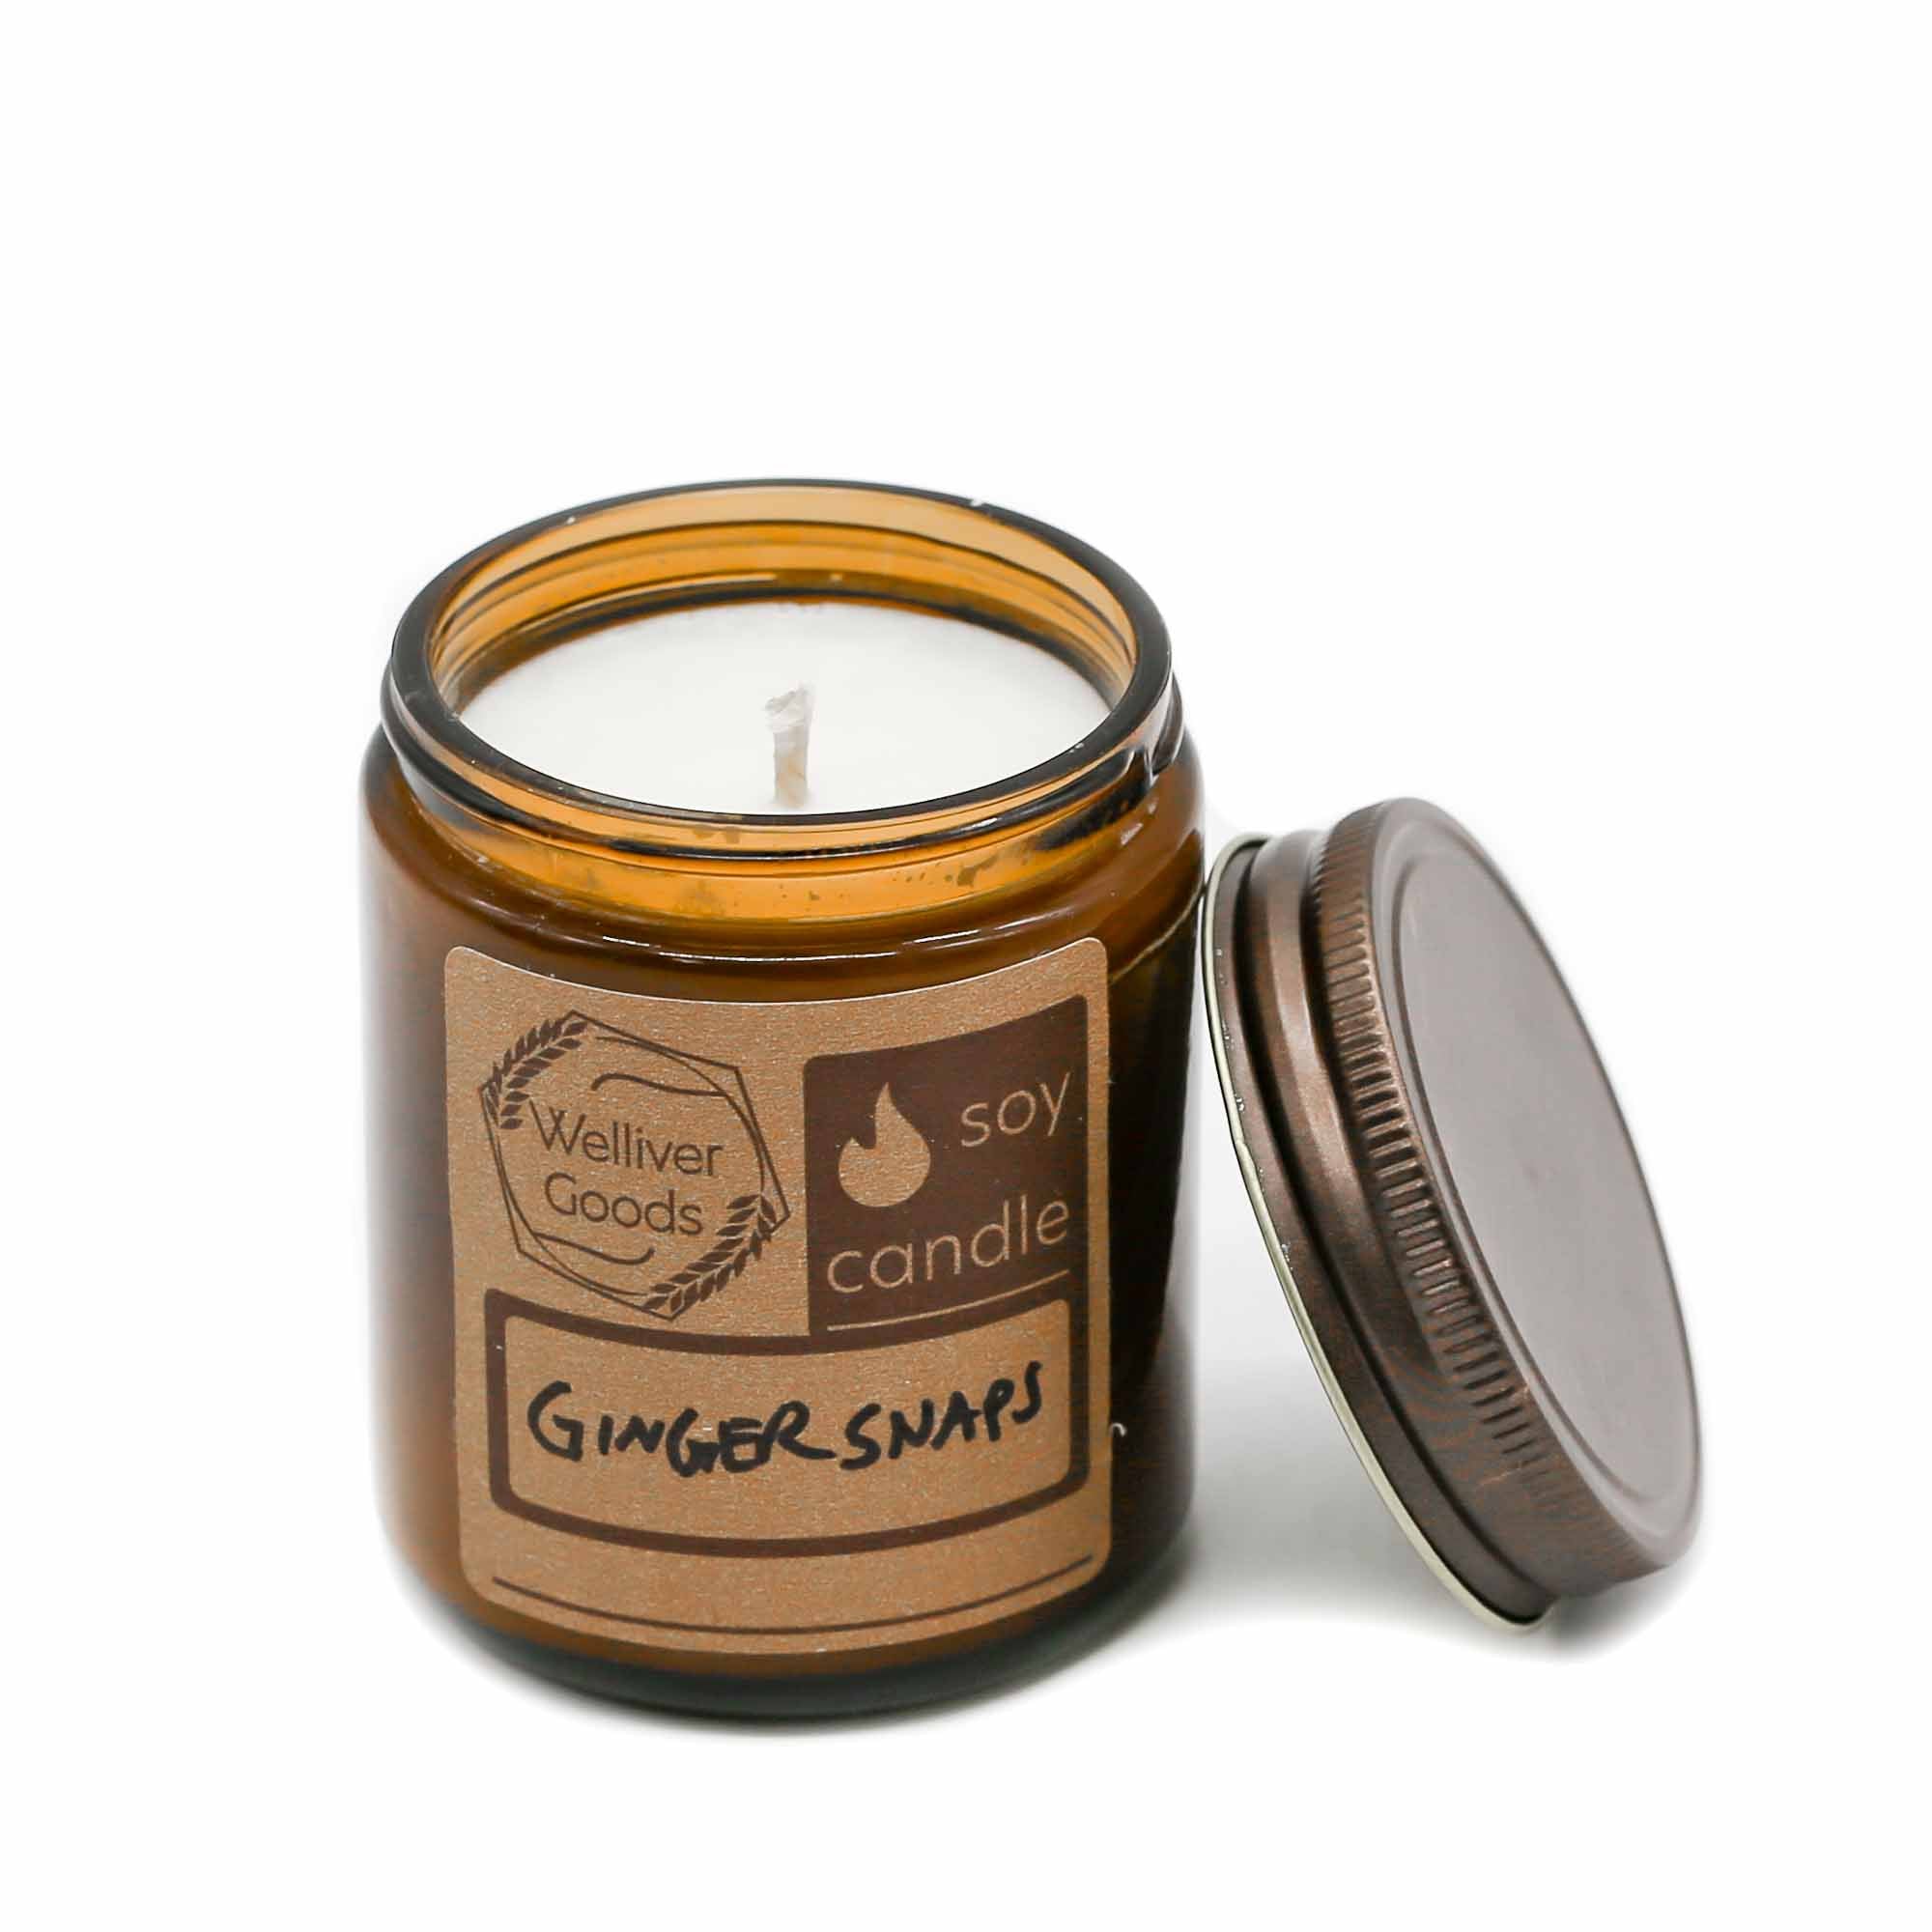 welliver goods candle - ginger snaps - Mortise And Tenon